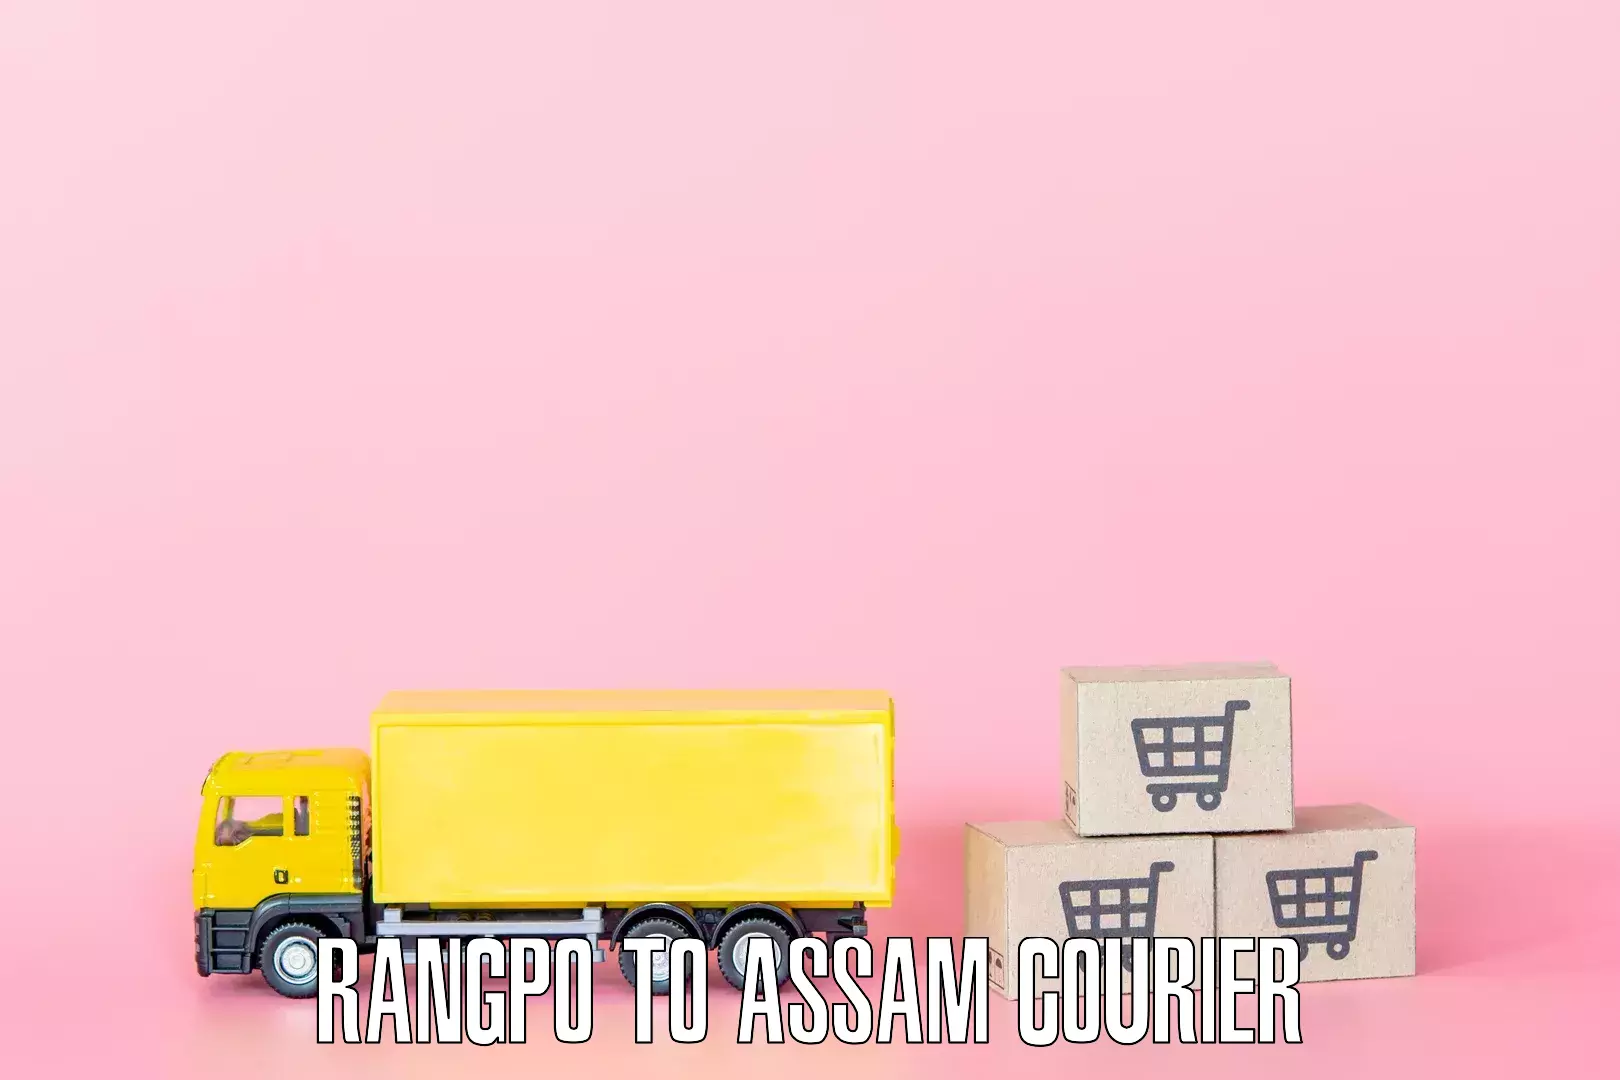 Furniture delivery service Rangpo to Assam